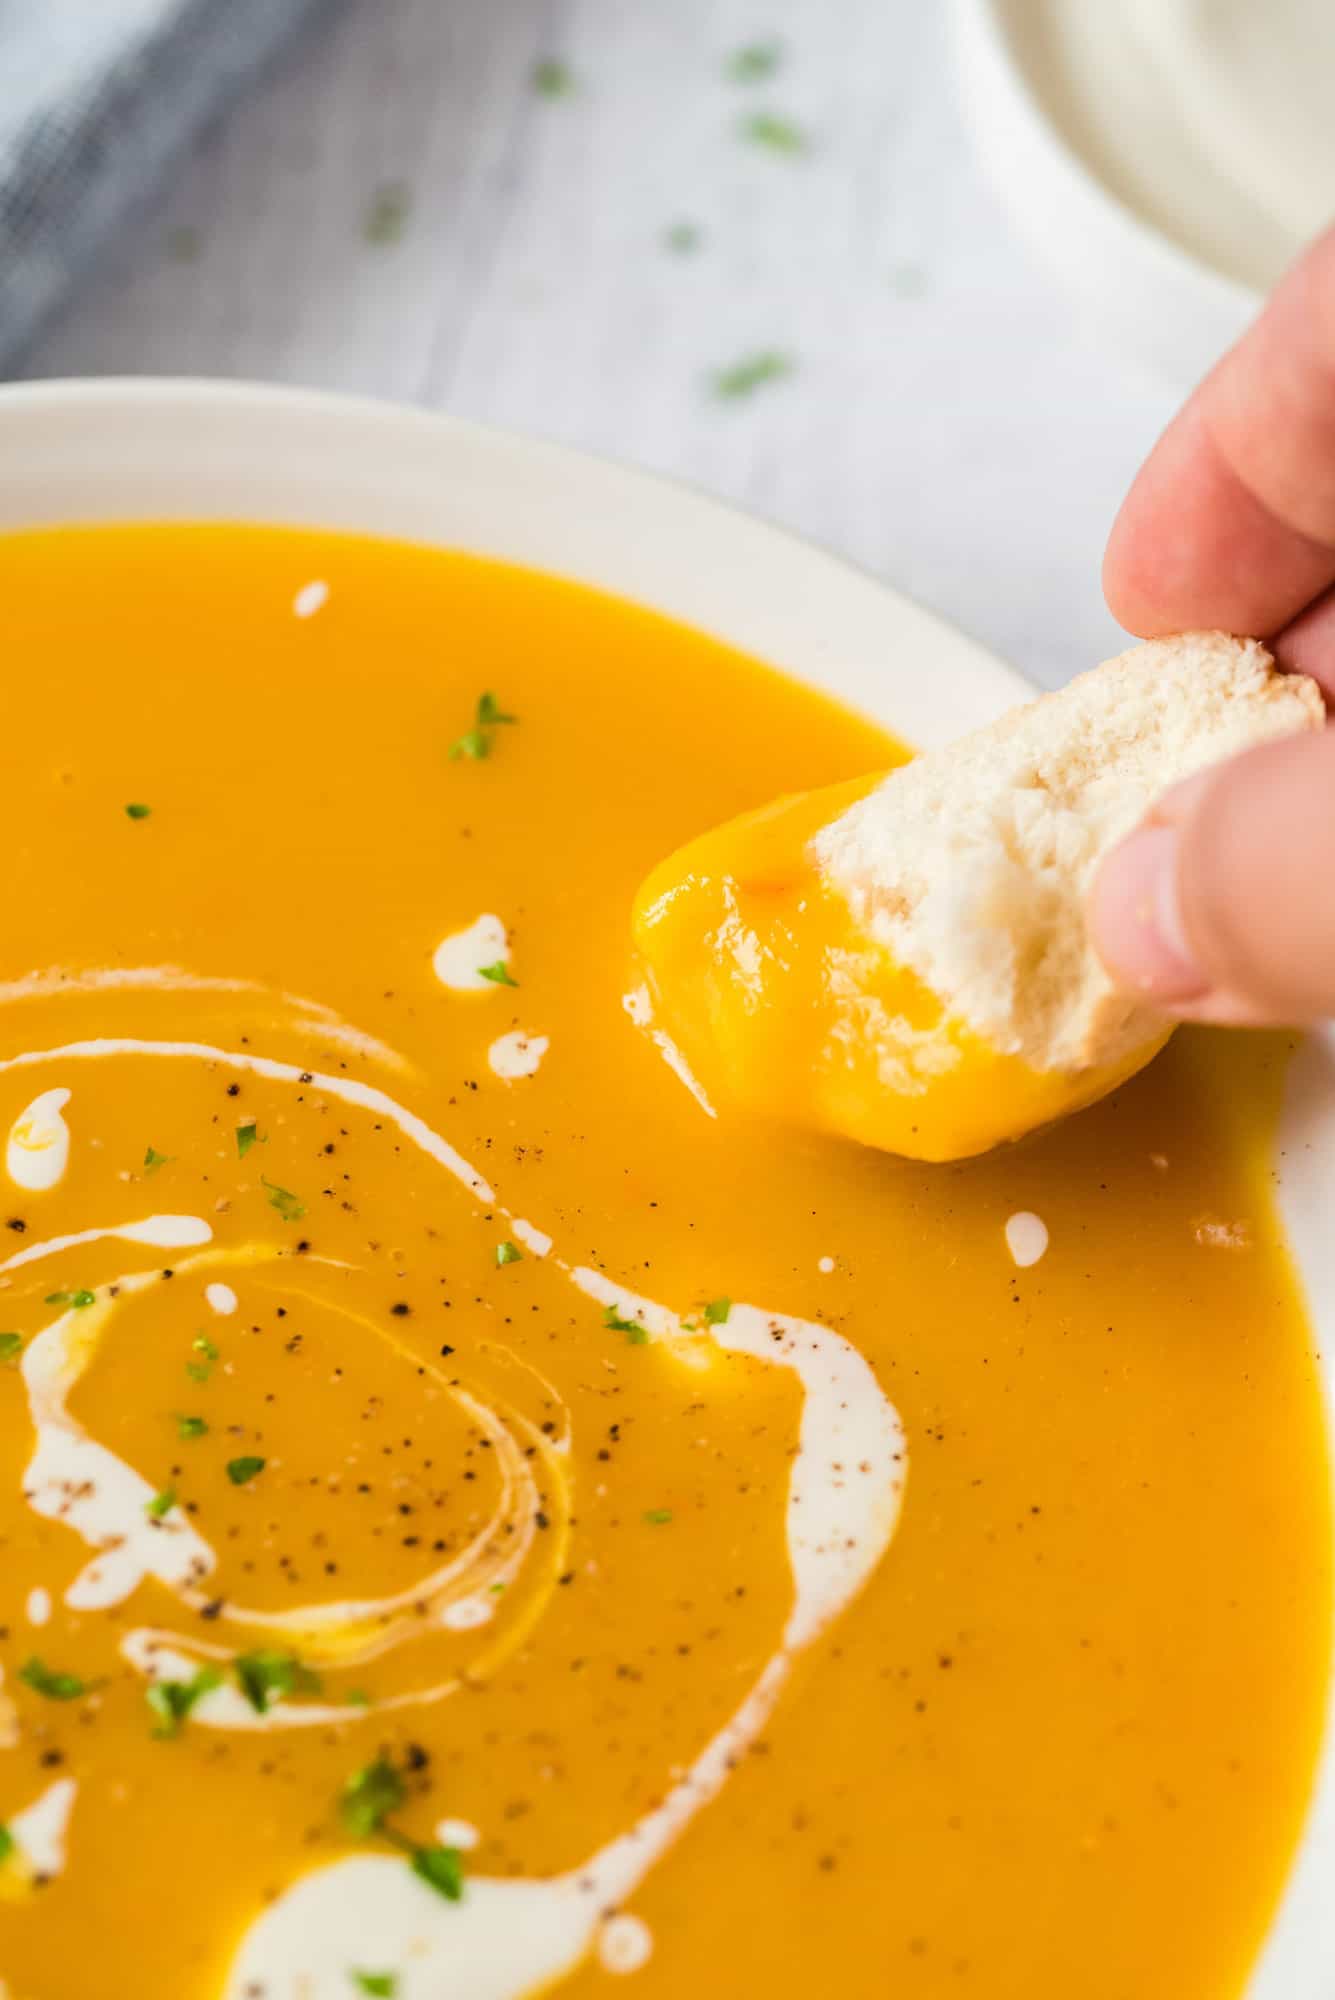 A hand dips a piece of bread into a bowl of pumpkin soup.